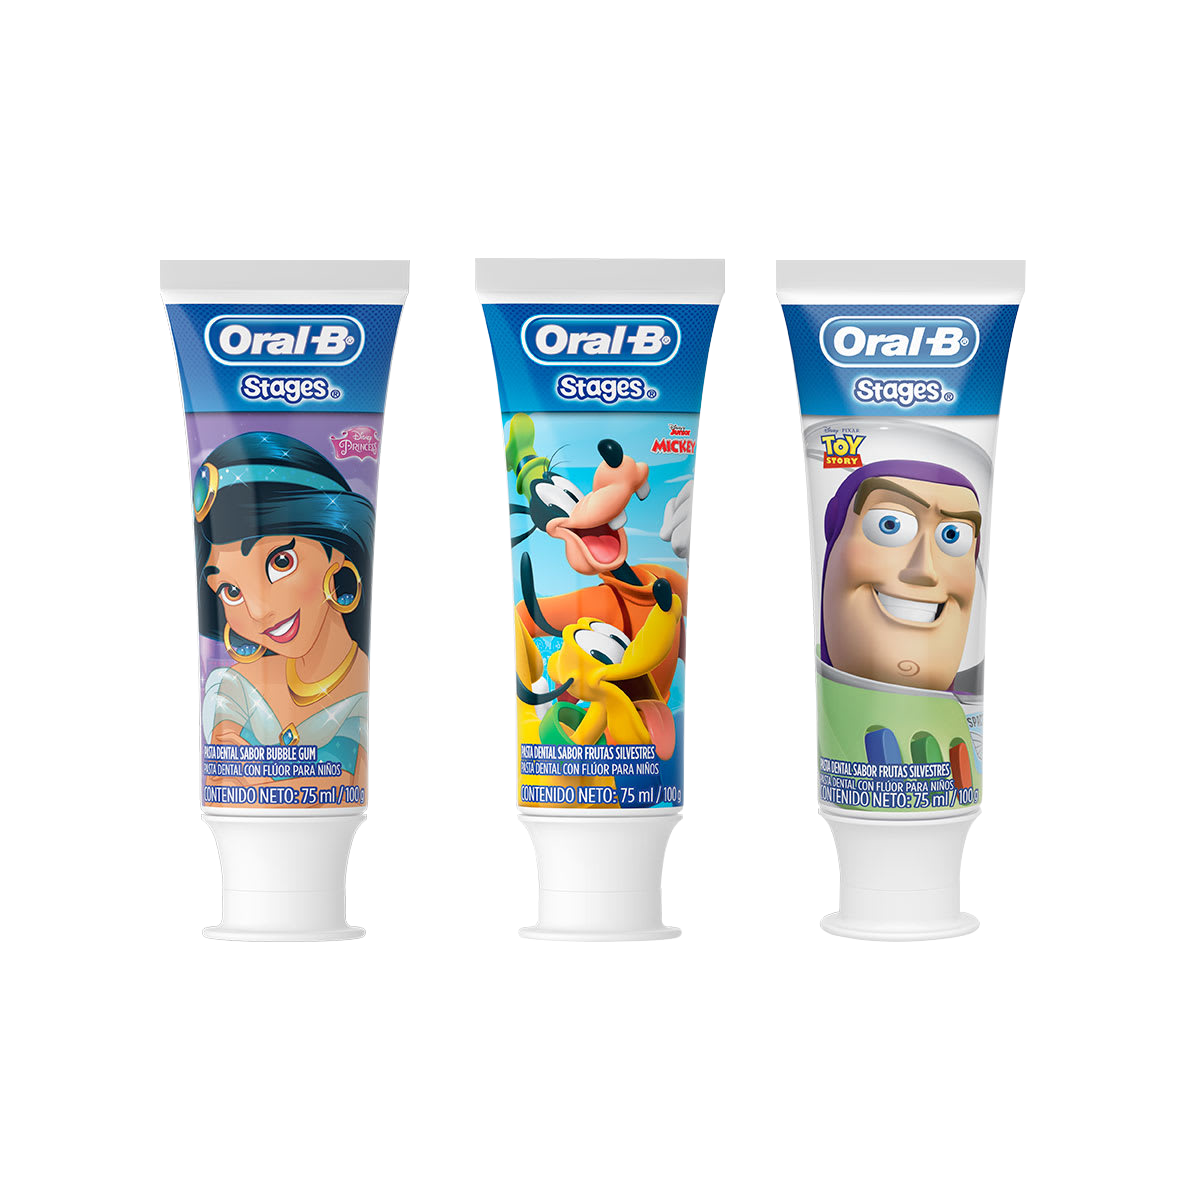 Pasta Dental Oral-B Pro Salud Stages (Toy Story, Princesas, Mickey) 